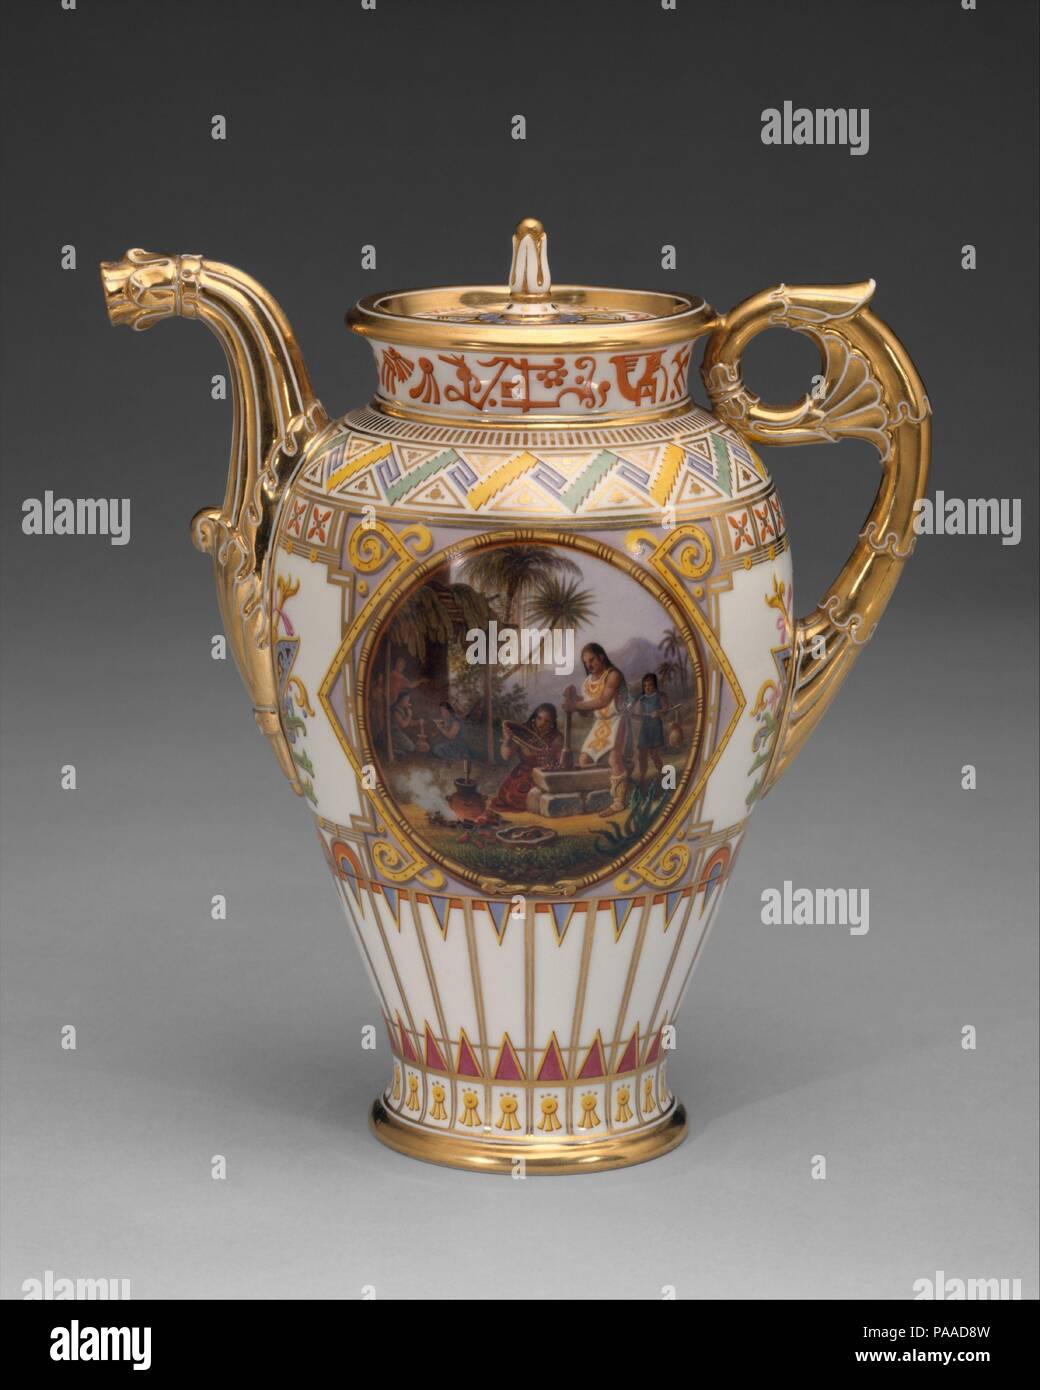 Coffeepot (cafetière 'campanienne') (part of a service). Culture: French, Sèvres. Decorator: Pictorial decoration by Jean Charles Develly (active 1813-47); Gilded by Pierre Riton (active 1821-60). Dimensions: Overall (confirmed): 7 9/16 x 6 15/16 x 4 1/4 in. (19.2 x 17.6 x 10.8 cm). Factory: Sèvres Manufactory (French, 1740-present). Patron: Commissioned by Louis Philippe, King of France (French, Paris 1773-1850 Claremont, Surrey) for Queen Marie-Amélie. Date: 1836.  The best of the Sèvres porcelain produced in the mid-nineteenth century displays an originality of conception unmatched by the o Stock Photo